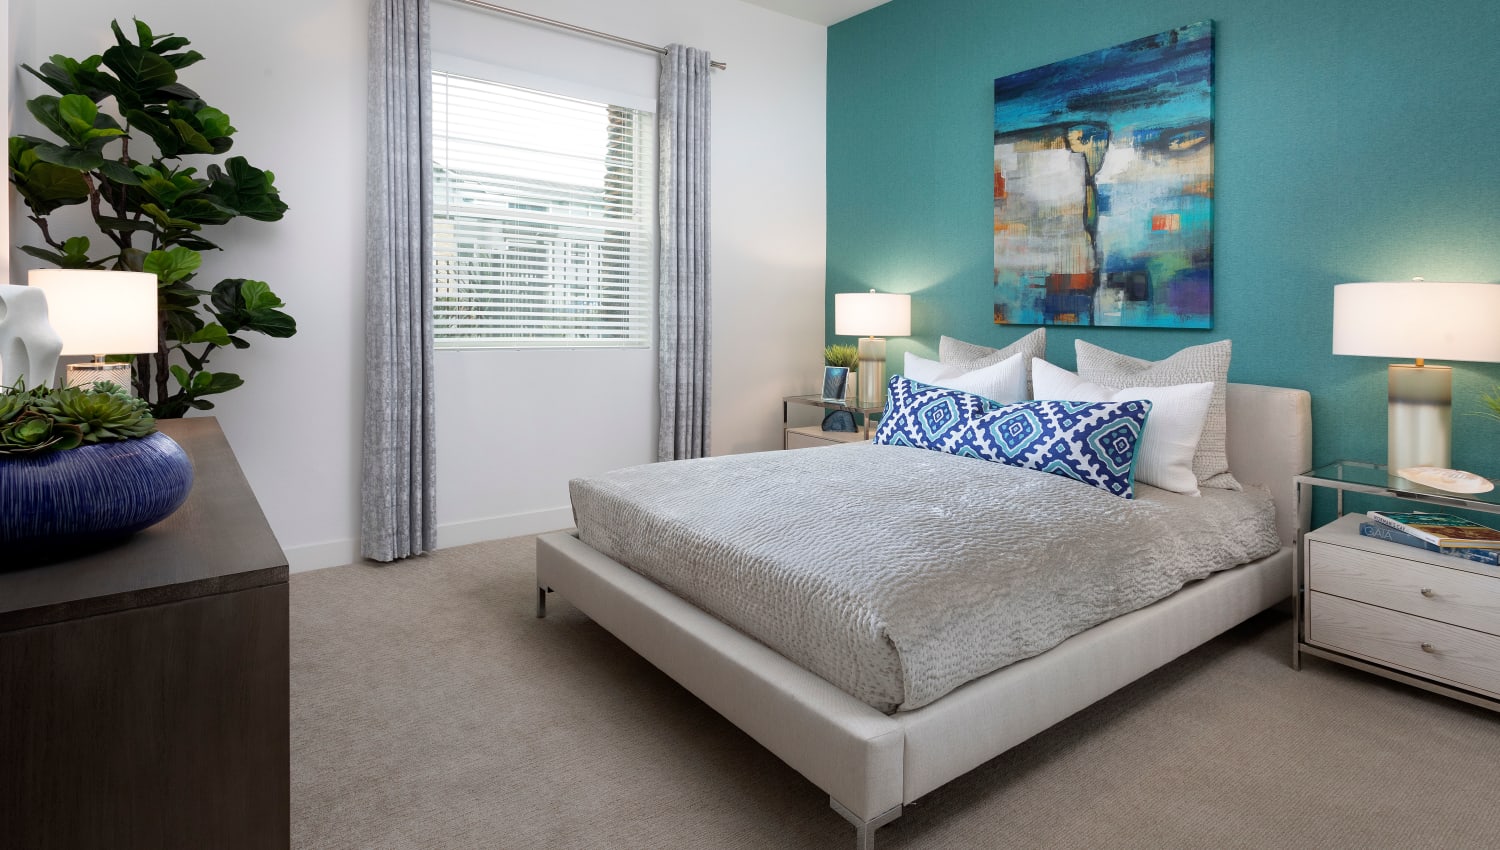 Bedroom with blue accents at The Residences at Escaya in Chula Vista, California